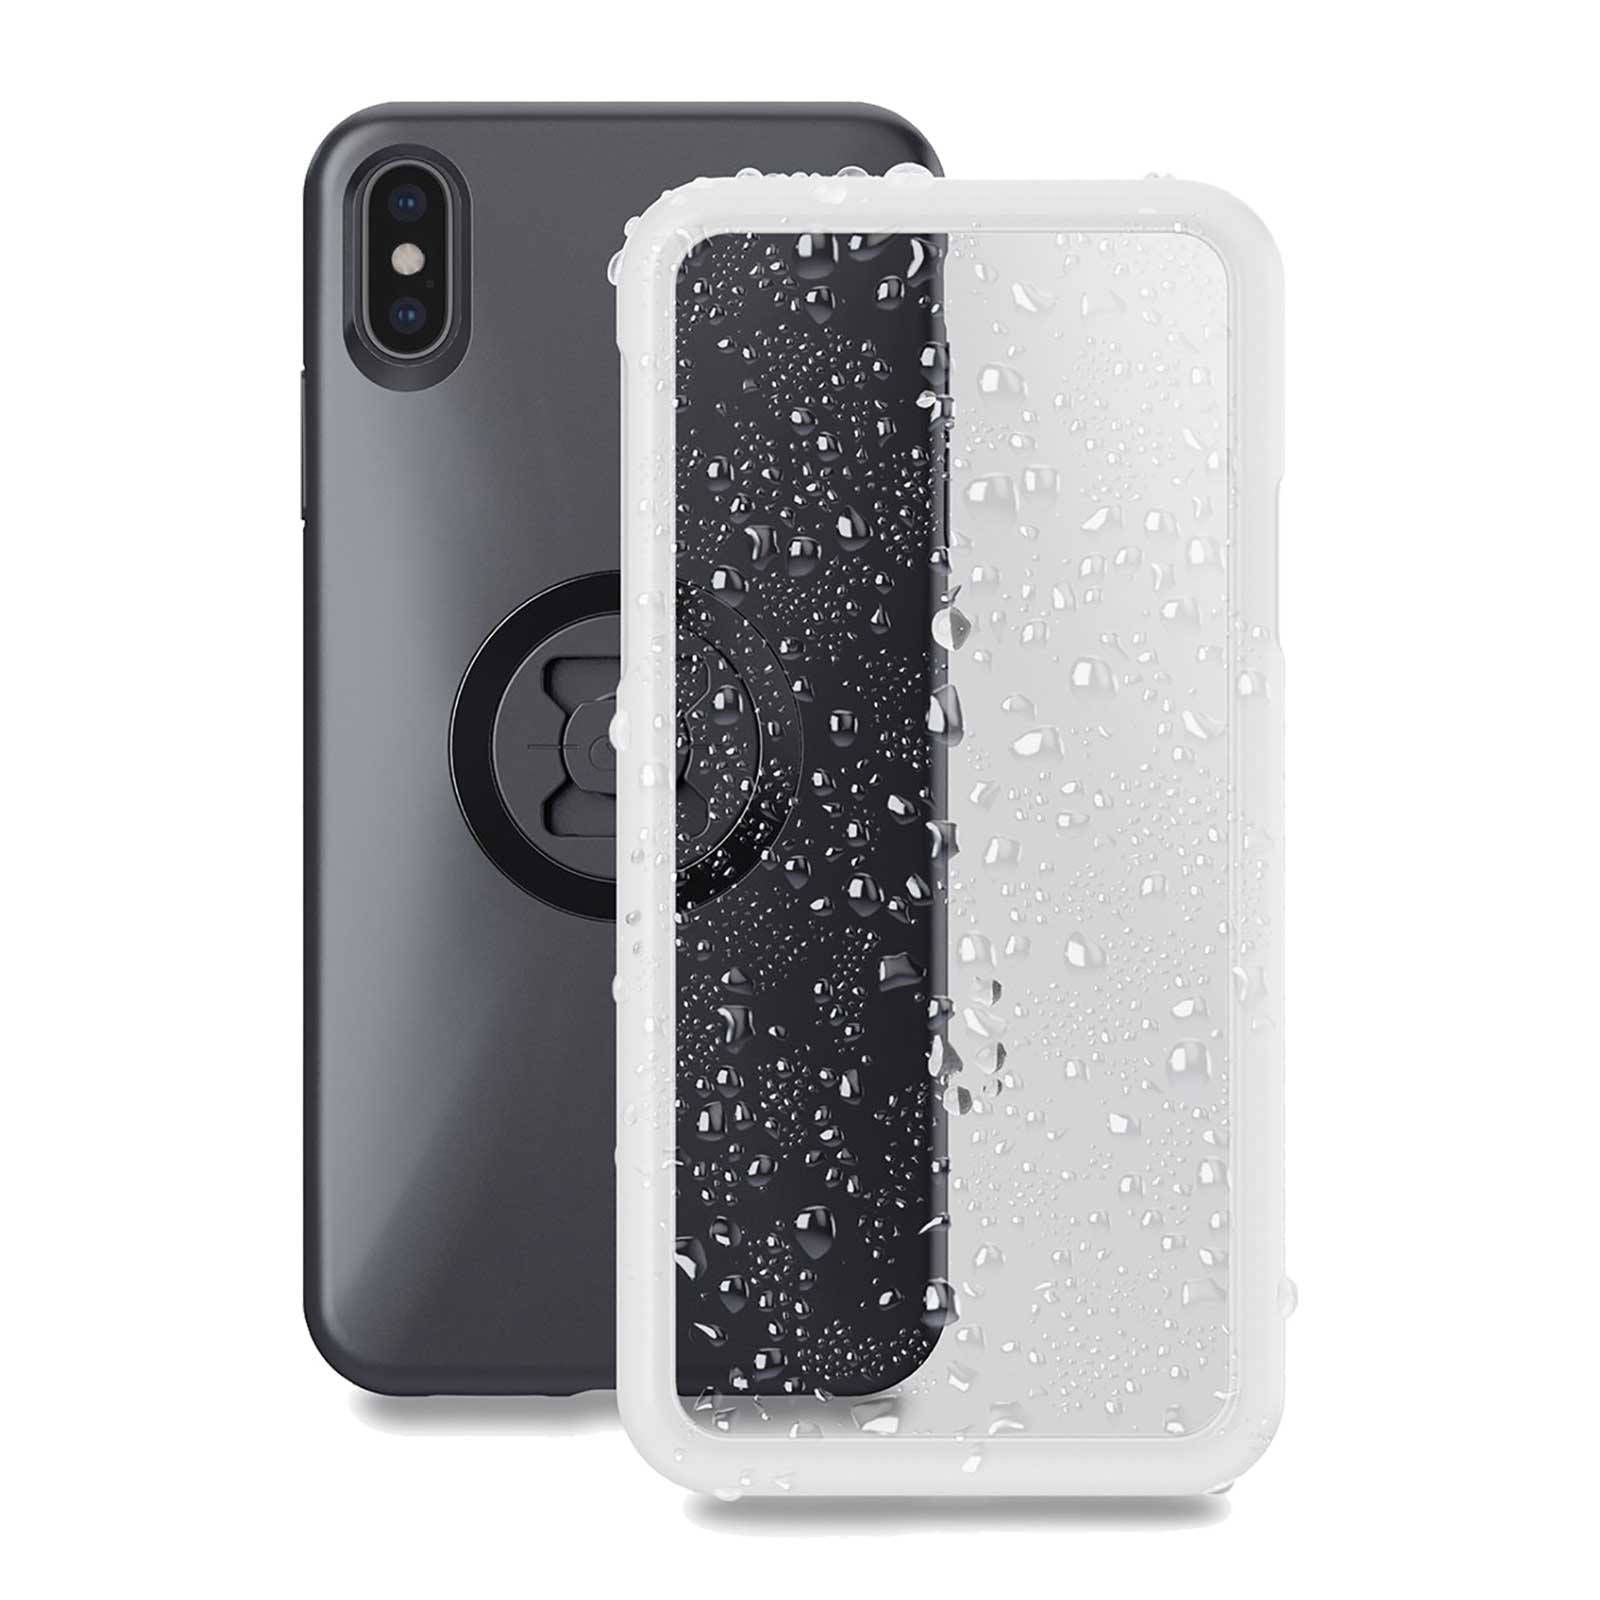 New SP CONNECT WEATHER COVER APPLE IPHONE XS MAX SPC53198